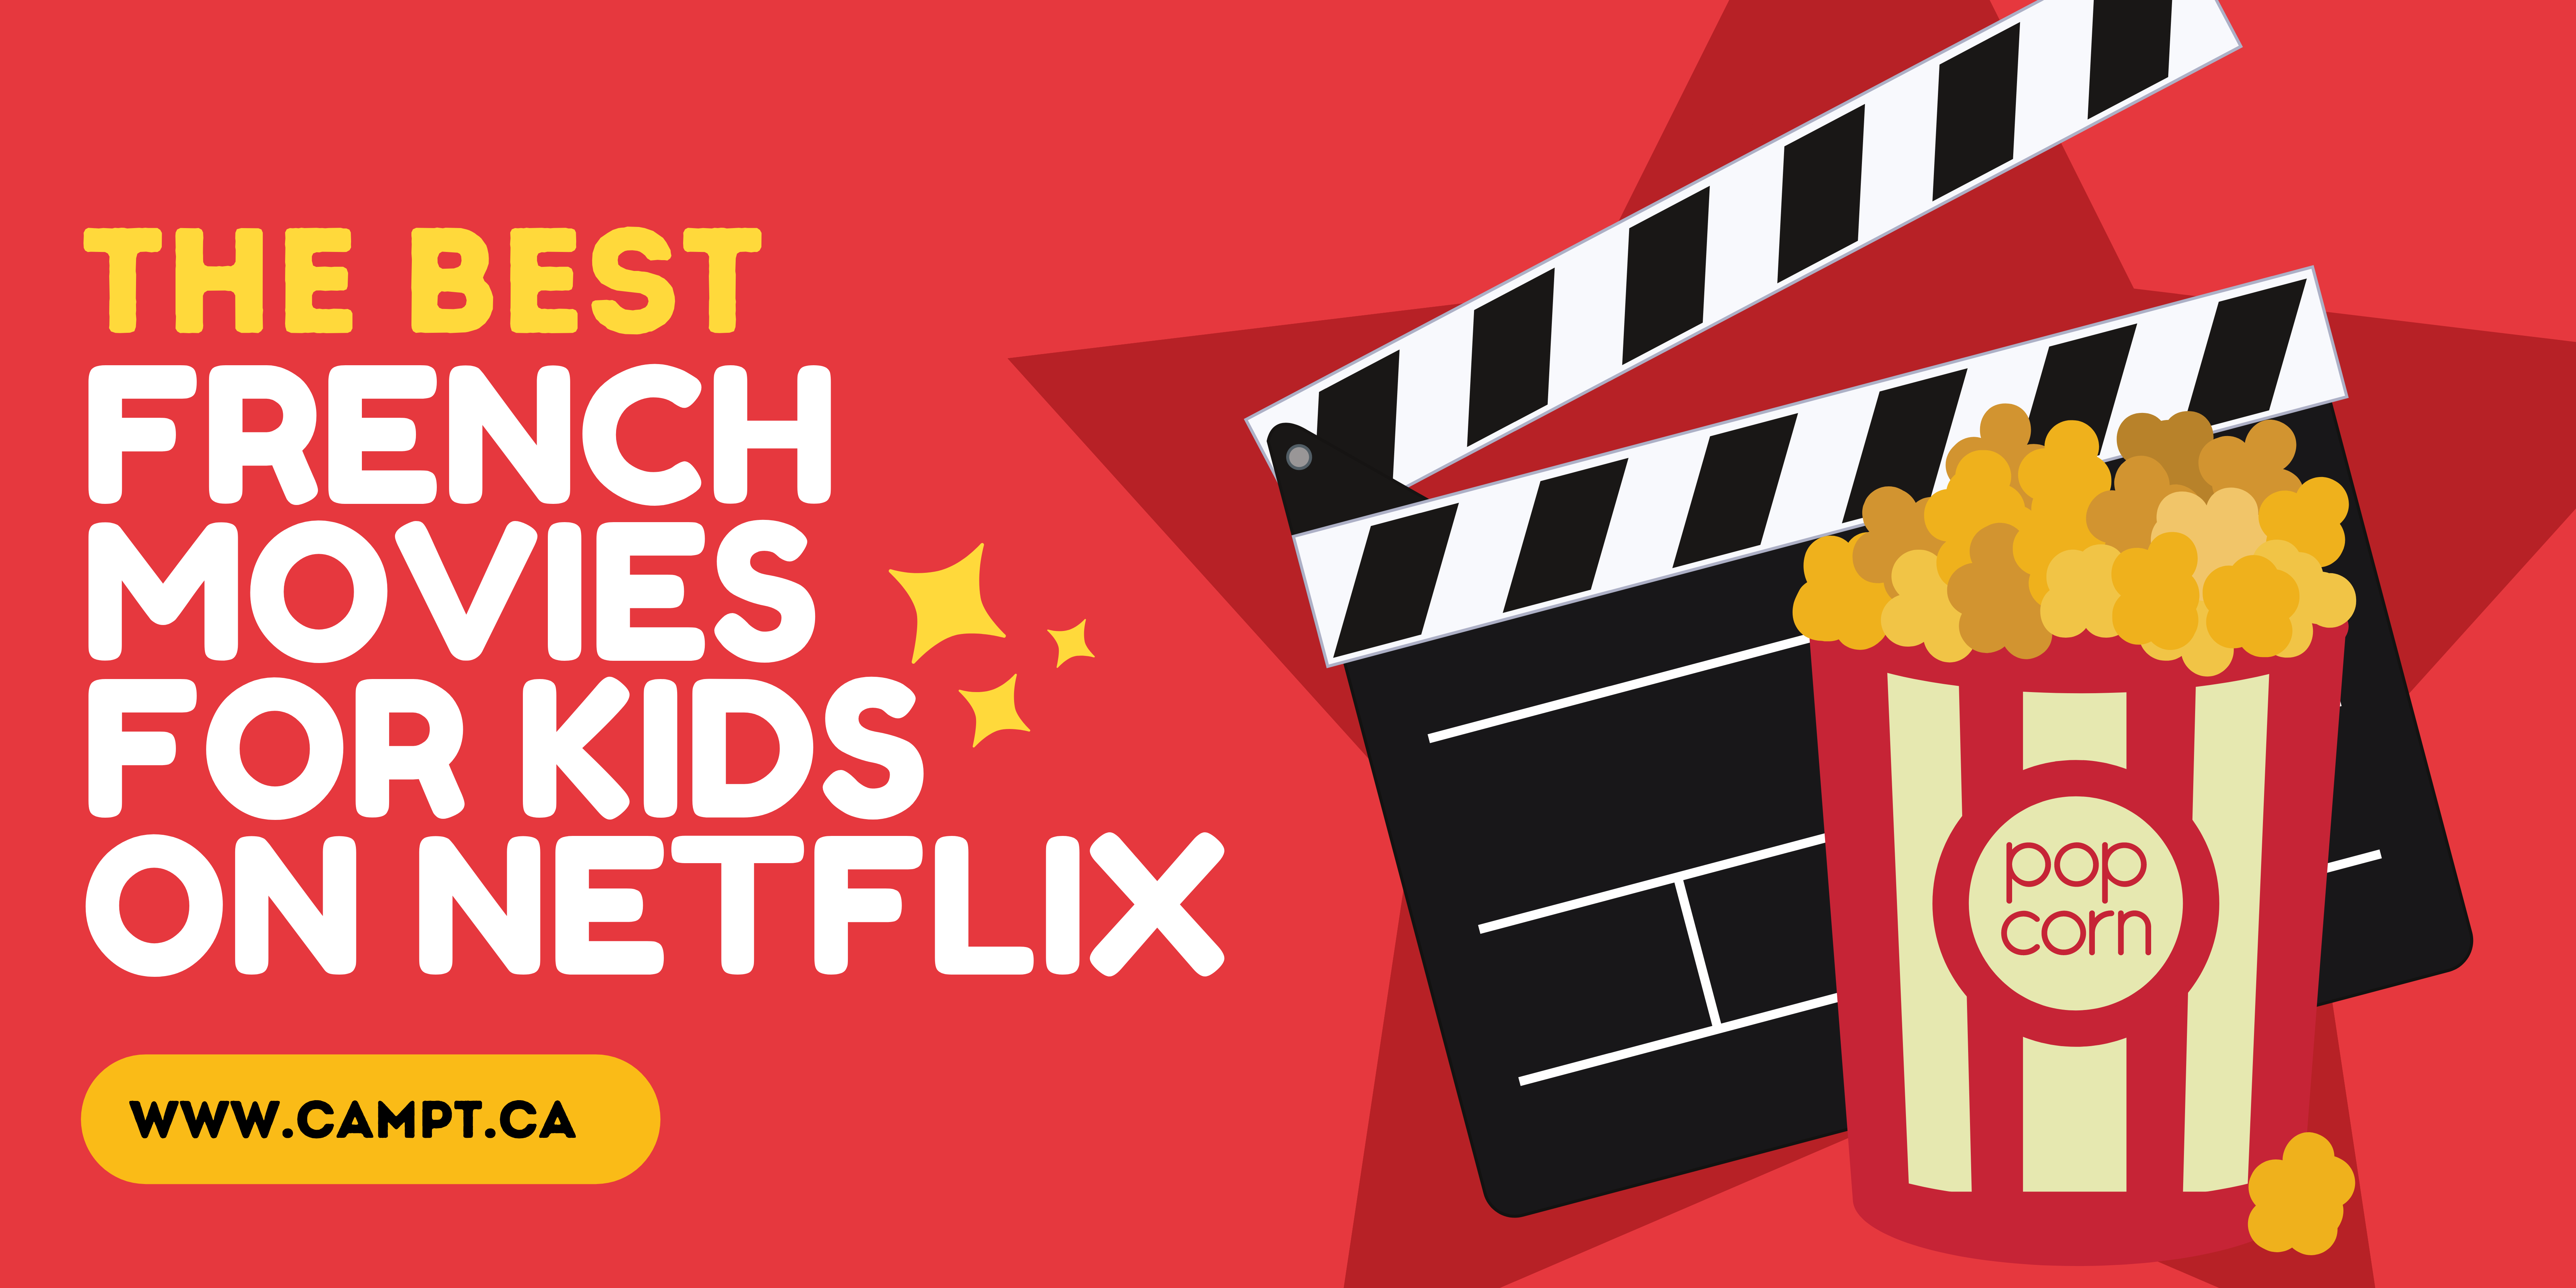 Netflix Movies for Kids in French￼ -